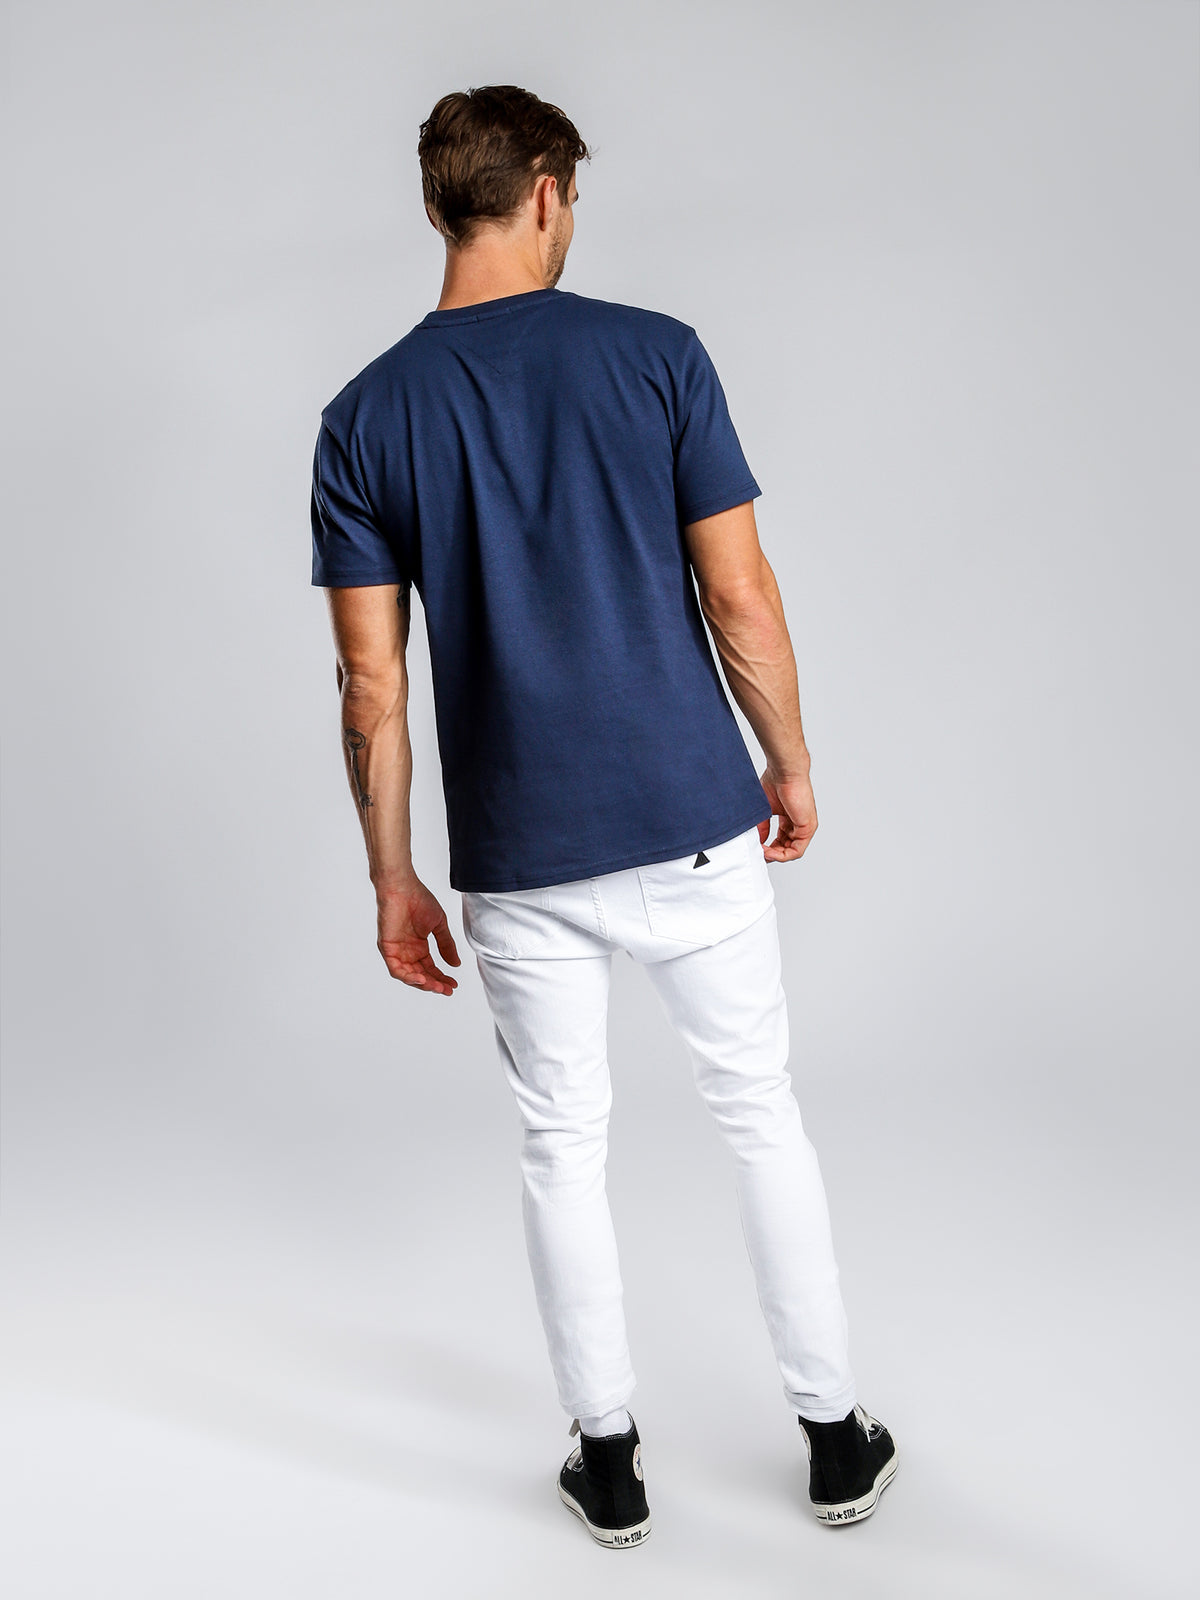 Tommy Jeans Collegiate Logo T-Shirt in Navy Blue